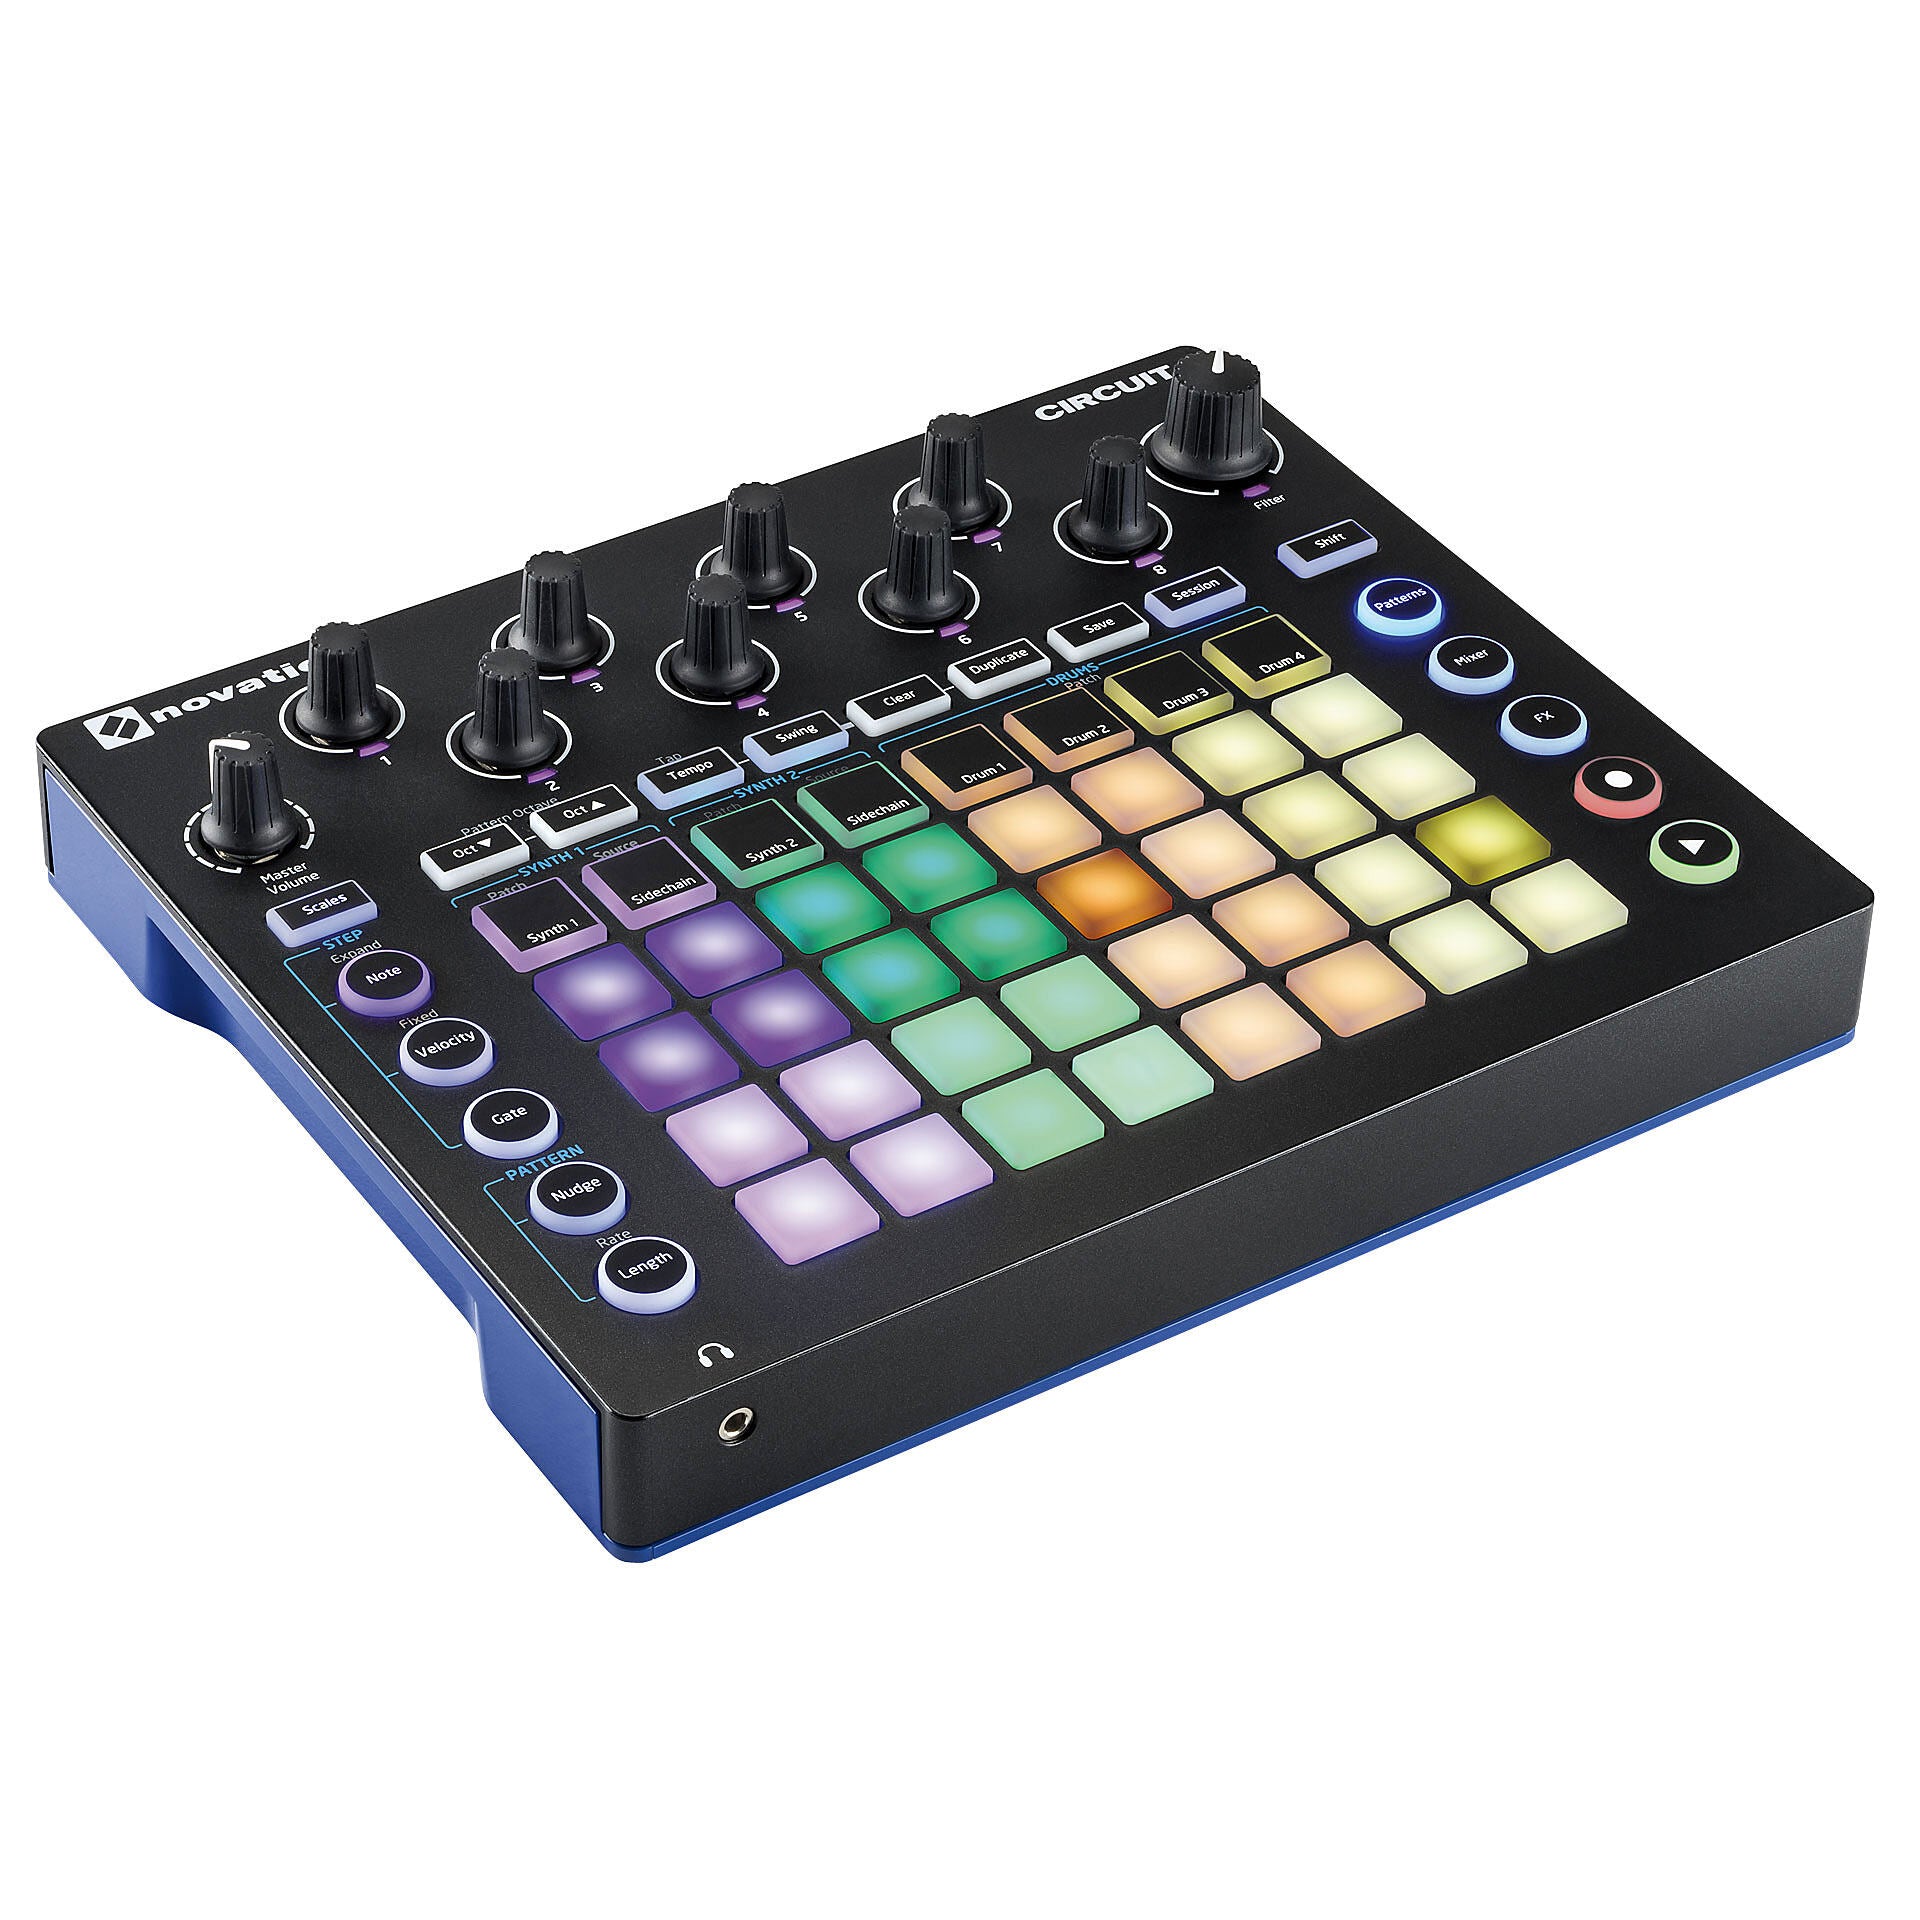 NOVATION LAUNCHPAD PRO PAD CONTROLLER WITH 64 VELOCITY AND TOUCH-SENSITIVE, NOVATION, MIDI CONTROLLER, novation-launchpad-pro-pad-controller-with-64-velocity-and-touch-sensetive, ZOSO MUSIC SDN BHD